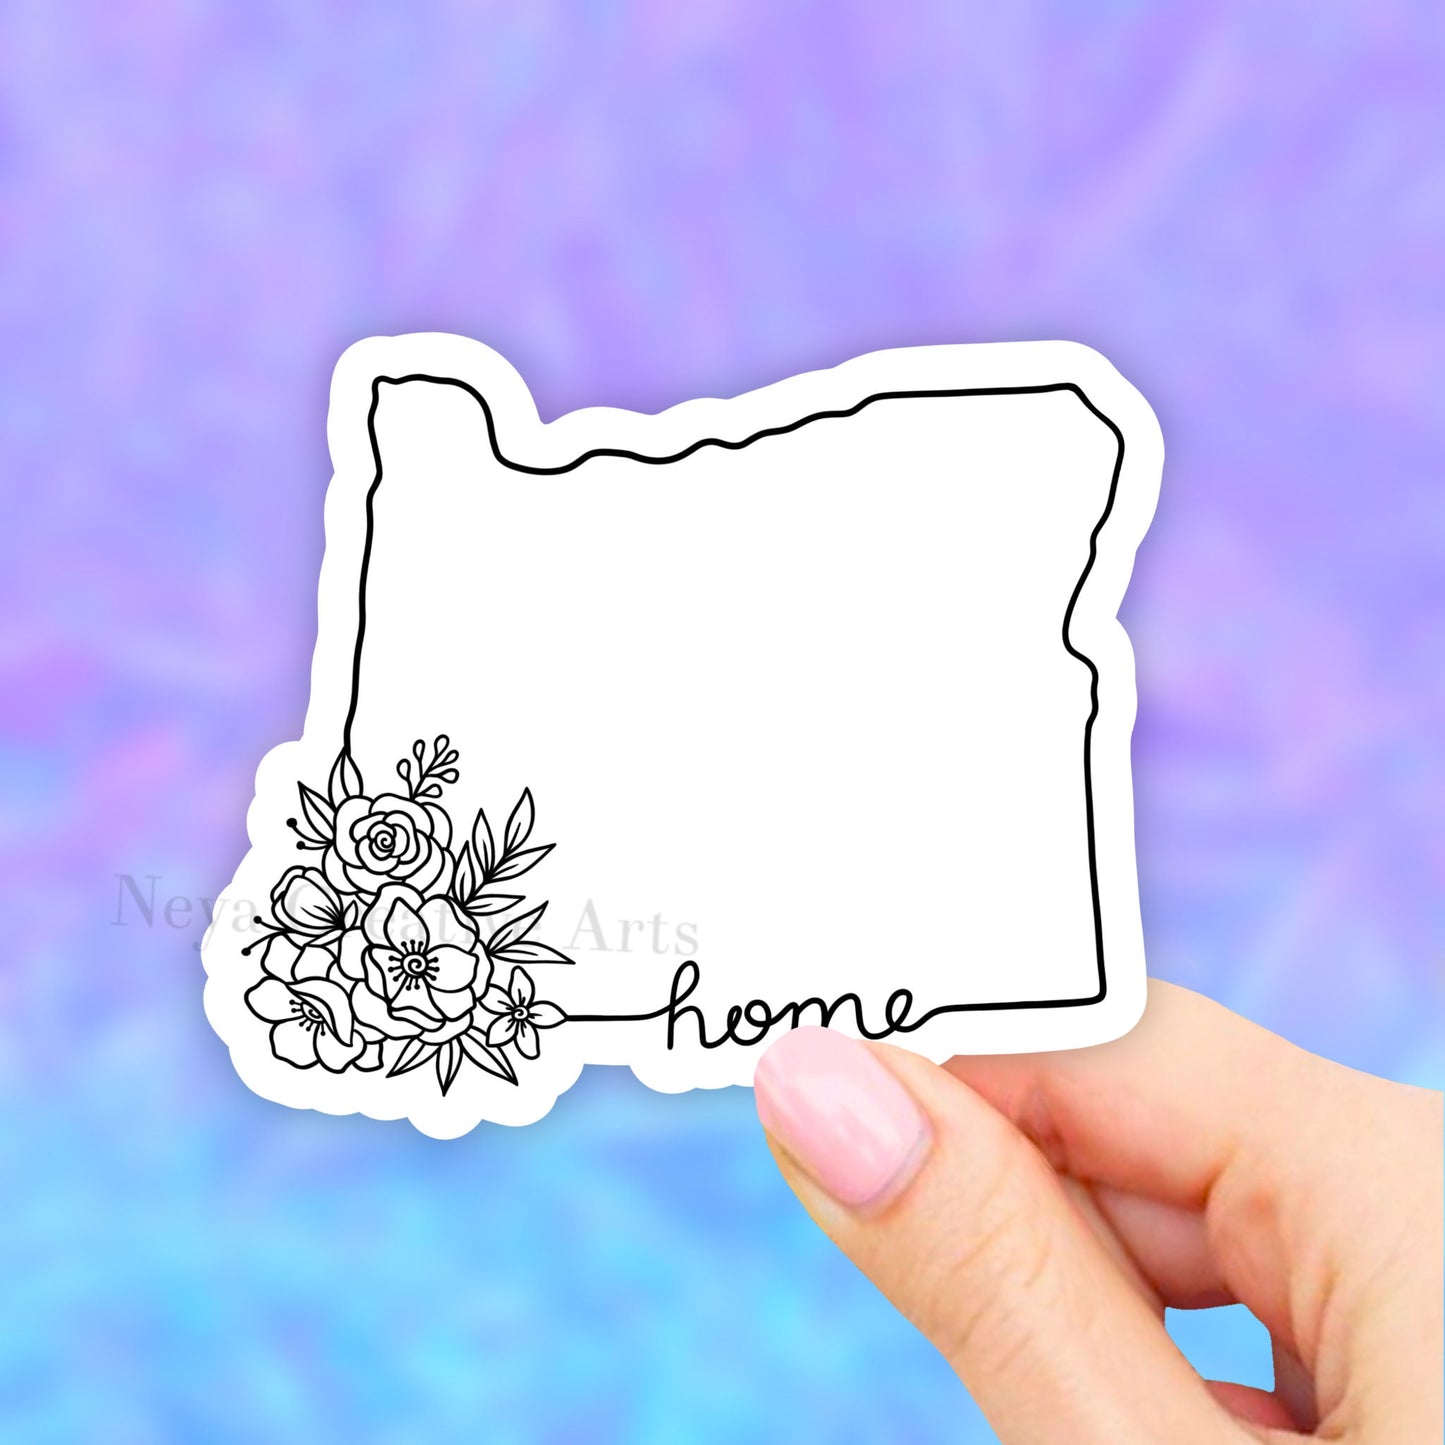 Oregon Sticker, Oregon State Stickers, Floral States Map, water bottle stickers, state stickers, USA State Art, USA Map Car Decal, Laptop